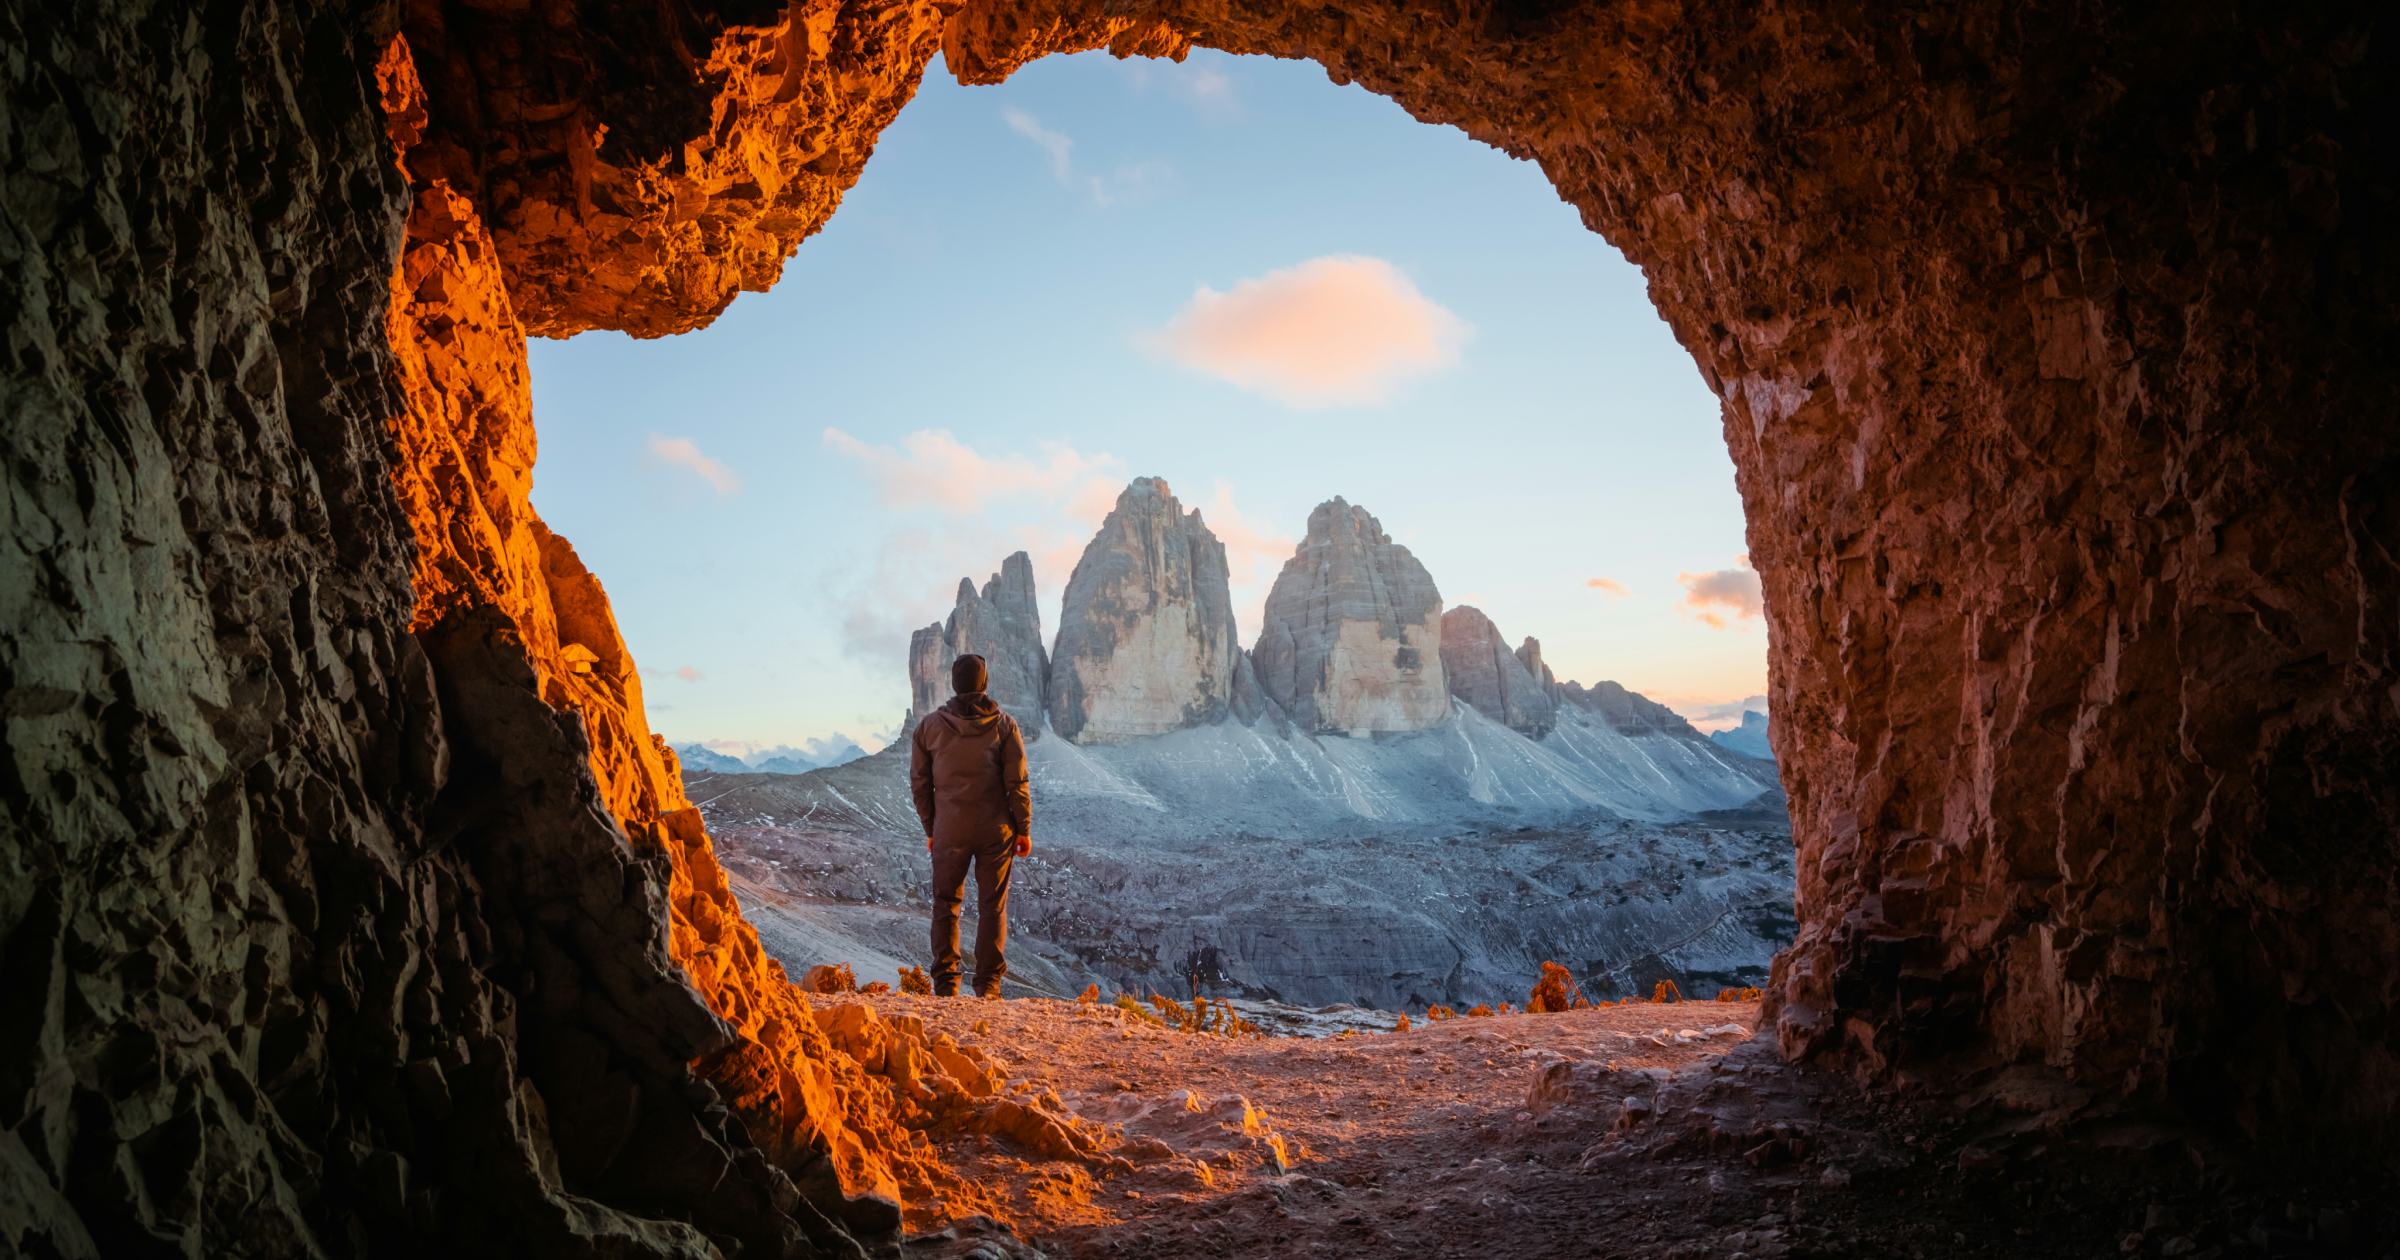 Tre Cime Di Lavaredo peaks in incredible orange sunset light. View from the cave in the mountain against Three peaks of Lavaredo, Dolomite Alps, Italy, Europe